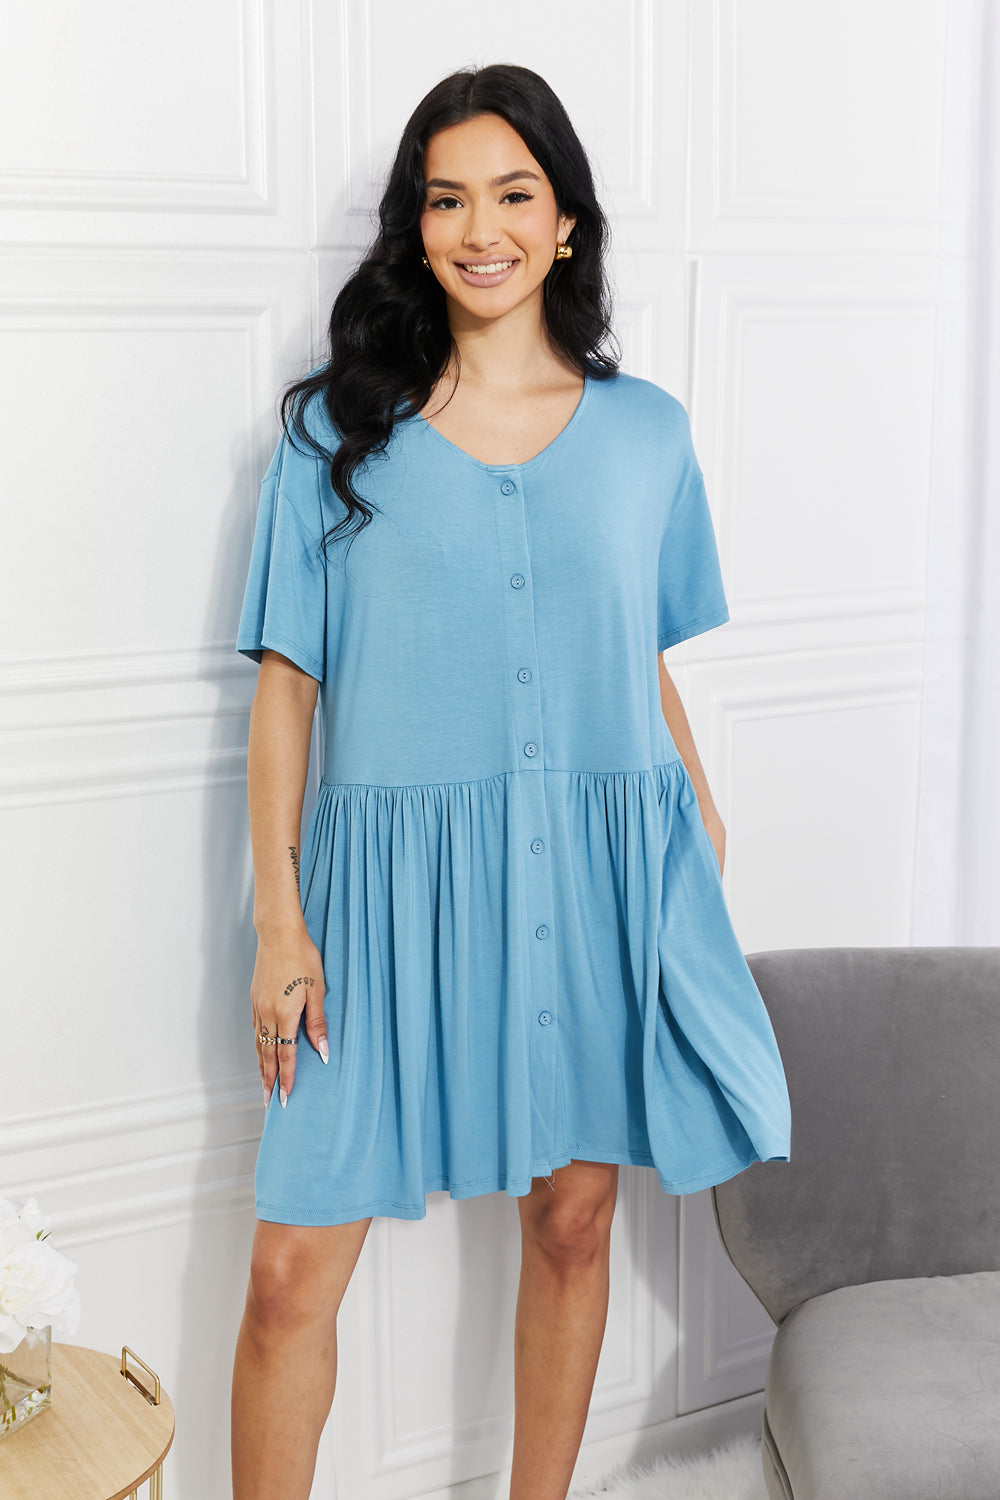 Yelete Oh Sweet Spring Button Up Flare Dress - Online Only